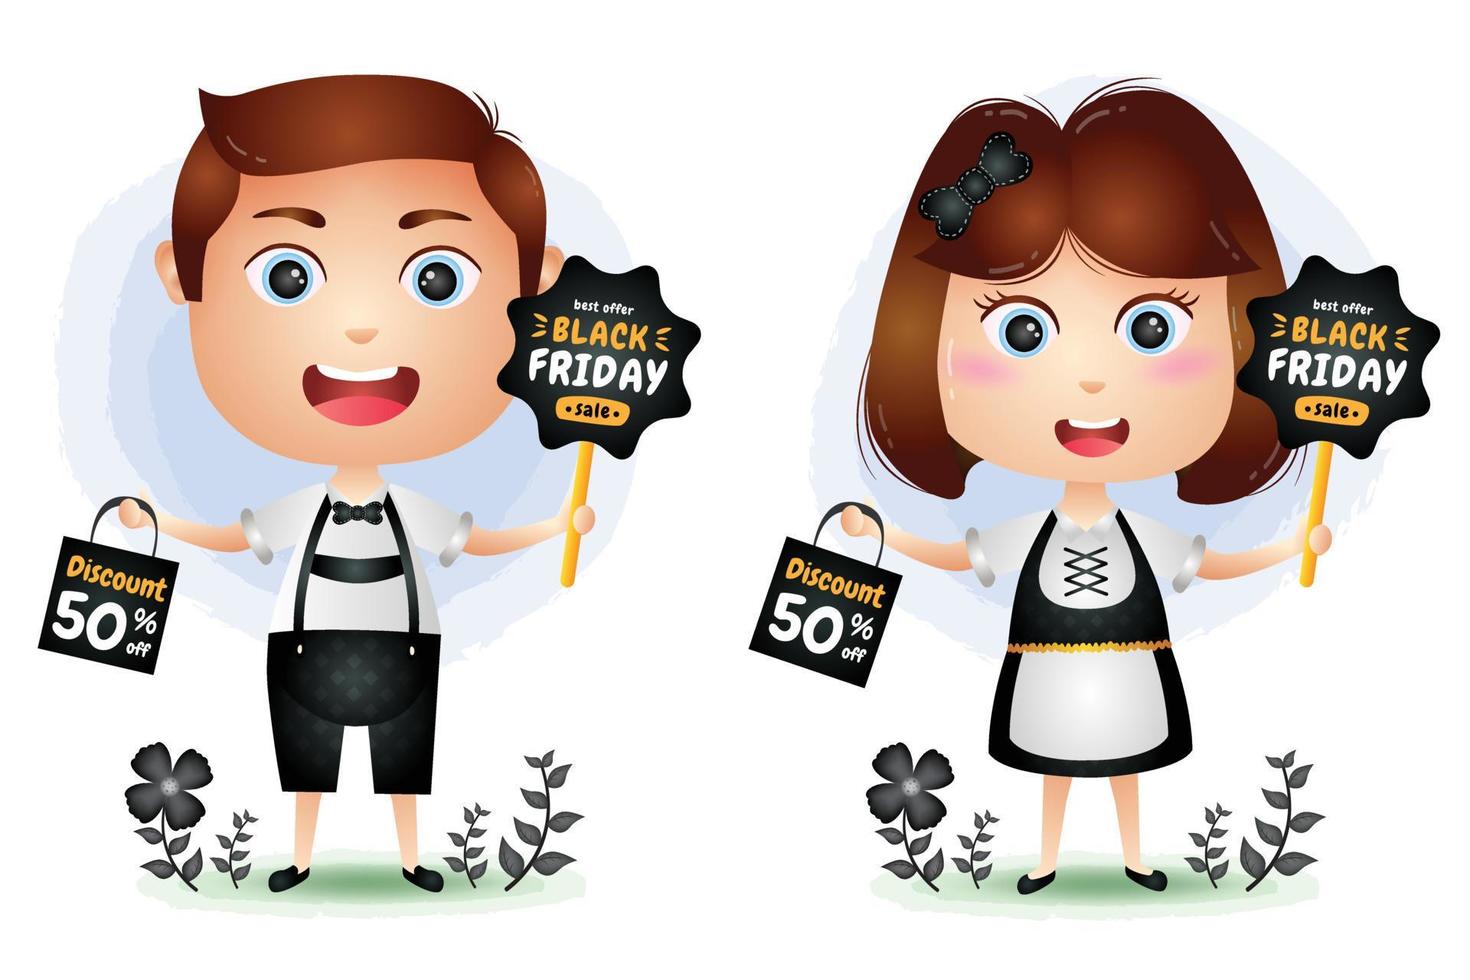 Black friday sale with cute couple character hold board promotion and shopping bag illustration vector